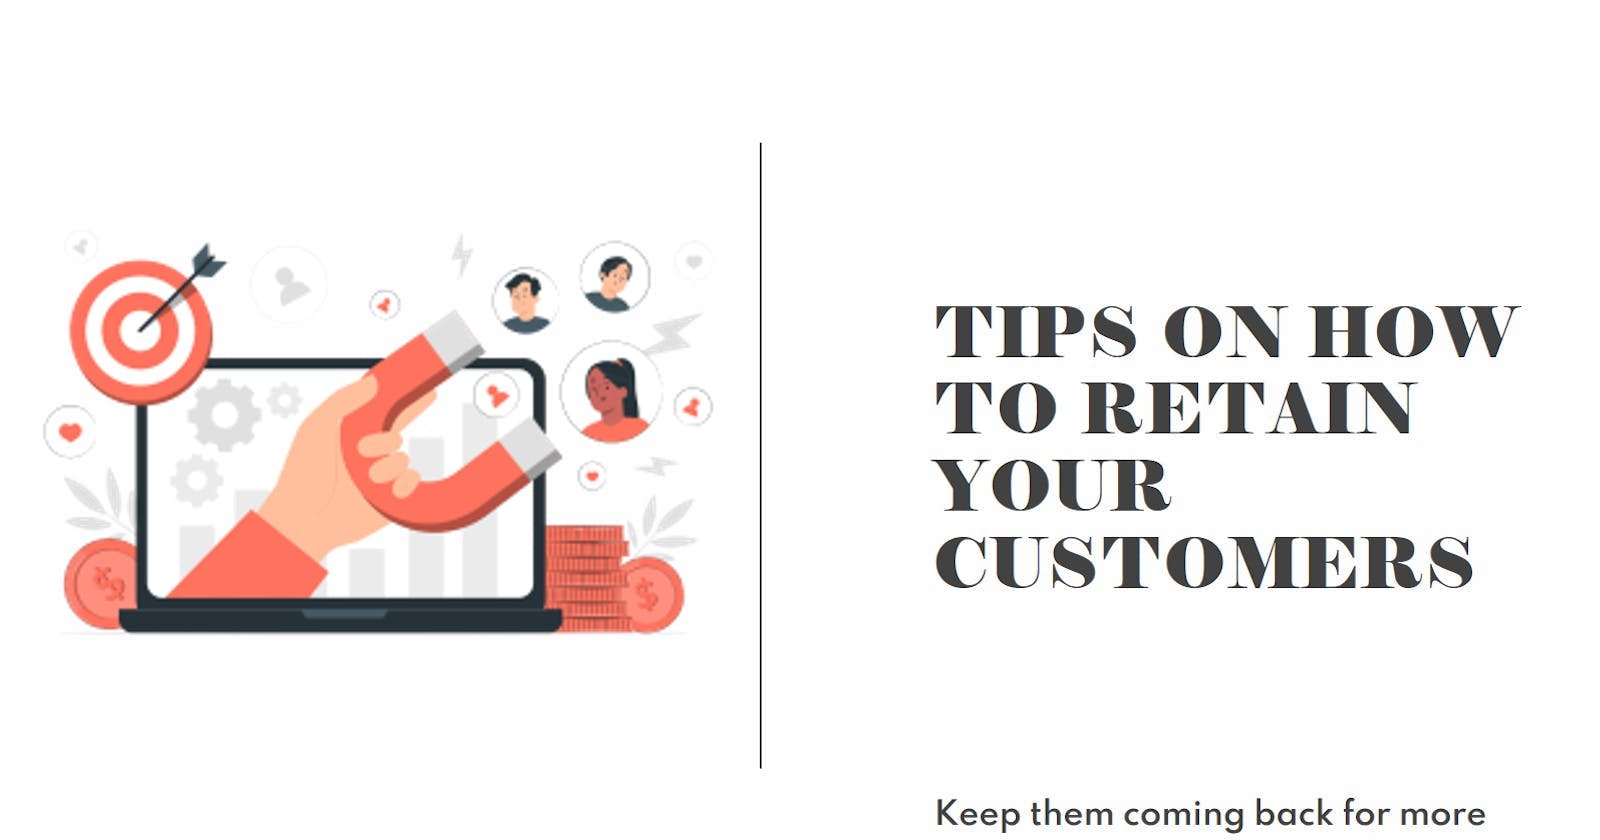 Tips And Strategies For Customer Retention.